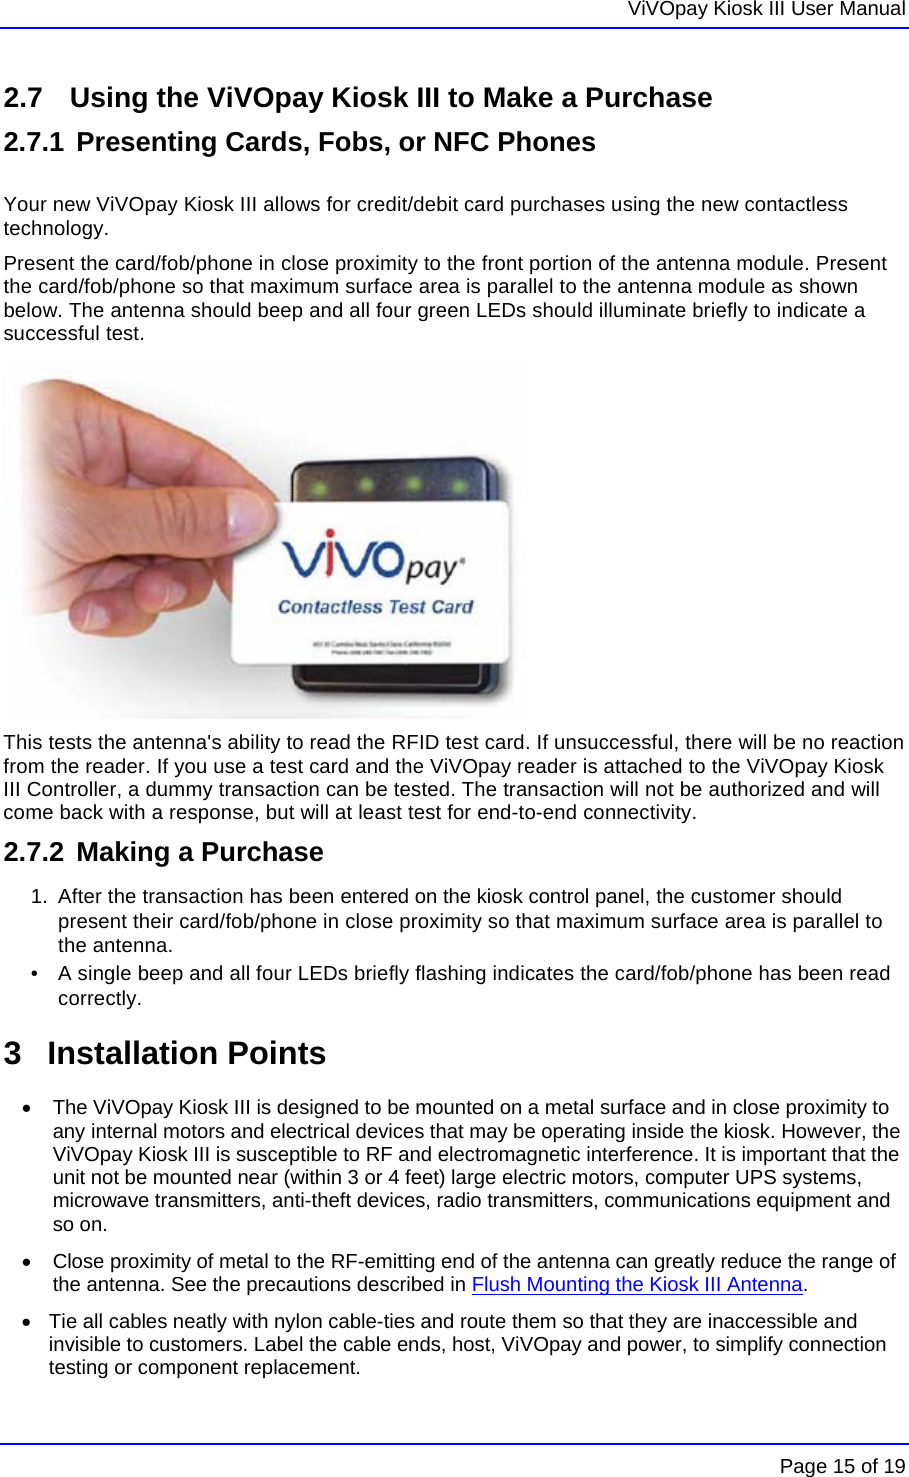   ViVOpay Kiosk III User Manual    Page 15 of 19 2.7   Using the ViVOpay Kiosk III to Make a Purchase 2.7.1 Presenting Cards, Fobs, or NFC Phones  Your new ViVOpay Kiosk III allows for credit/debit card purchases using the new contactless technology. Present the card/fob/phone in close proximity to the front portion of the antenna module. Present the card/fob/phone so that maximum surface area is parallel to the antenna module as shown below. The antenna should beep and all four green LEDs should illuminate briefly to indicate a successful test.  This tests the antenna&apos;s ability to read the RFID test card. If unsuccessful, there will be no reaction from the reader. If you use a test card and the ViVOpay reader is attached to the ViVOpay Kiosk III Controller, a dummy transaction can be tested. The transaction will not be authorized and will come back with a response, but will at least test for end-to-end connectivity.  2.7.2  Making a Purchase 1.  After the transaction has been entered on the kiosk control panel, the customer should present their card/fob/phone in close proximity so that maximum surface area is parallel to the antenna.  •   A single beep and all four LEDs briefly flashing indicates the card/fob/phone has been read correctly. 3 Installation Points  •  The ViVOpay Kiosk III is designed to be mounted on a metal surface and in close proximity to any internal motors and electrical devices that may be operating inside the kiosk. However, the ViVOpay Kiosk III is susceptible to RF and electromagnetic interference. It is important that the unit not be mounted near (within 3 or 4 feet) large electric motors, computer UPS systems, microwave transmitters, anti-theft devices, radio transmitters, communications equipment and so on. •  Close proximity of metal to the RF-emitting end of the antenna can greatly reduce the range of the antenna. See the precautions described in Flush Mounting the Kiosk III Antenna. •  Tie all cables neatly with nylon cable-ties and route them so that they are inaccessible and invisible to customers. Label the cable ends, host, ViVOpay and power, to simplify connection testing or component replacement. 